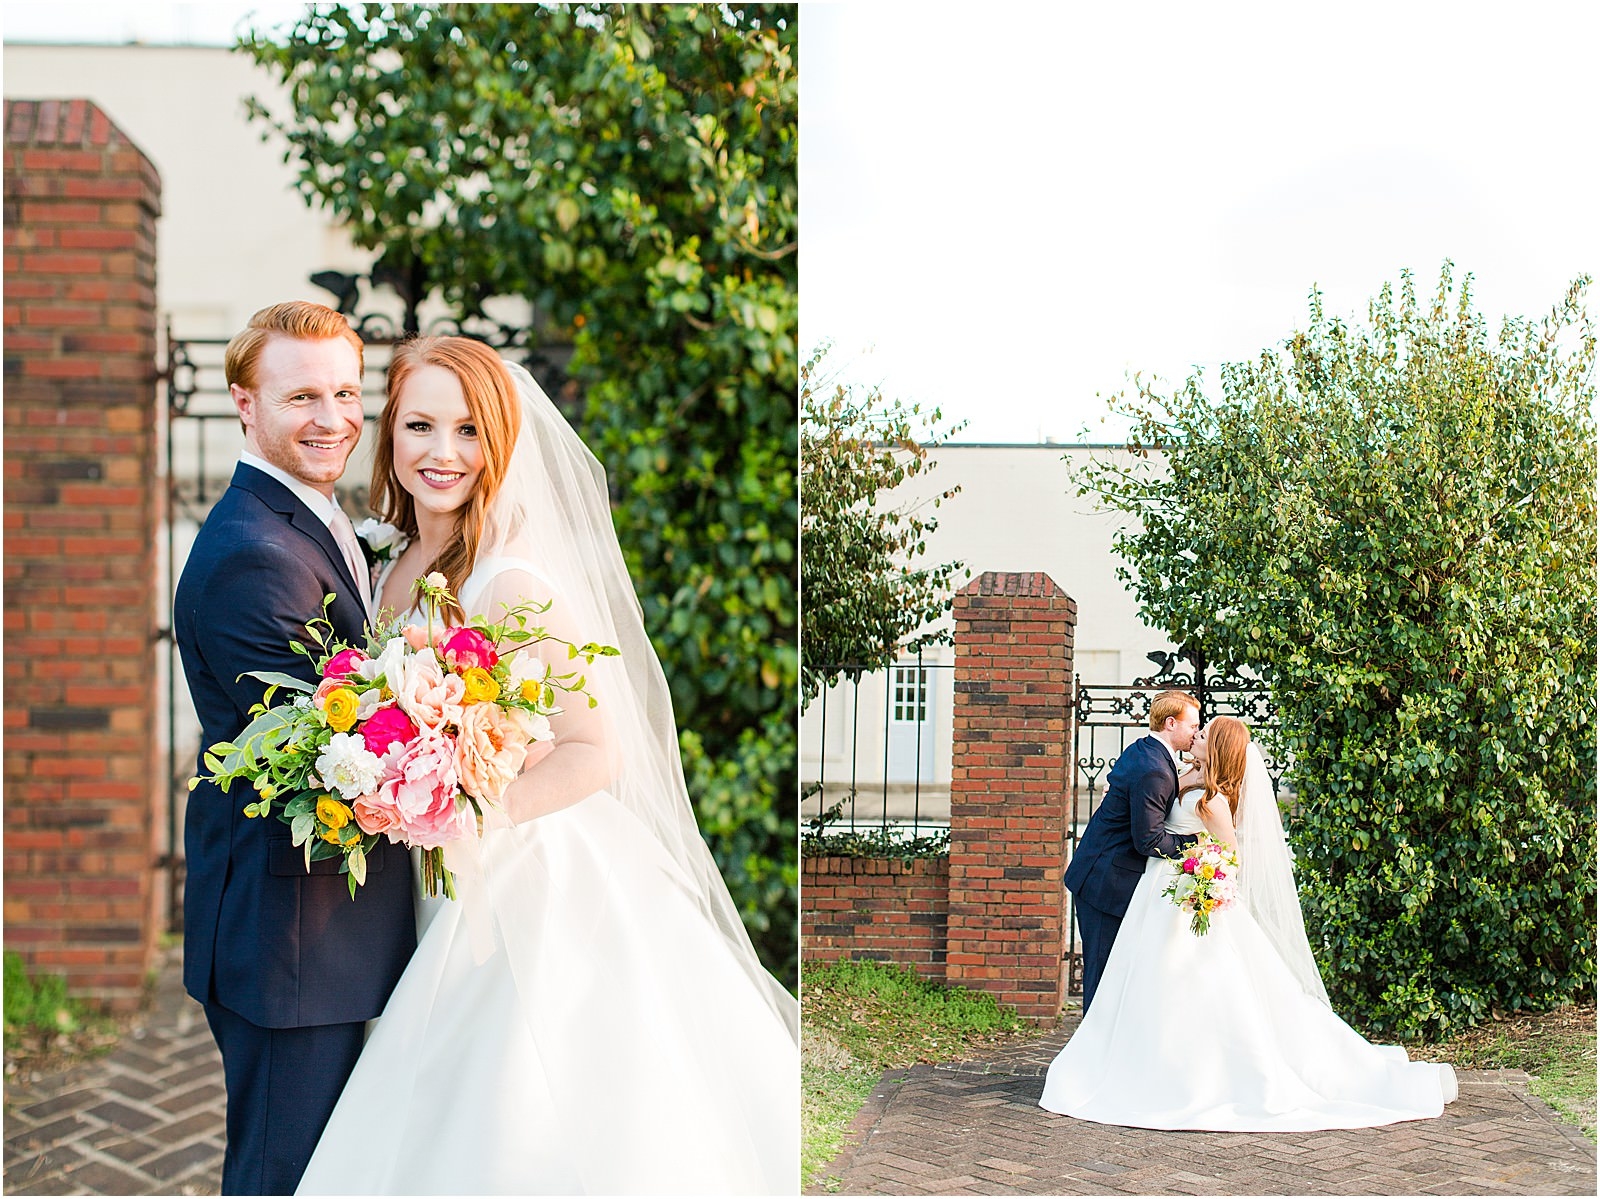 A Perfectly Intimate Wedding in Downtown Evansville Indiana | Jennah and Steve | Bret and Brandie Photography | | 0100.jpg